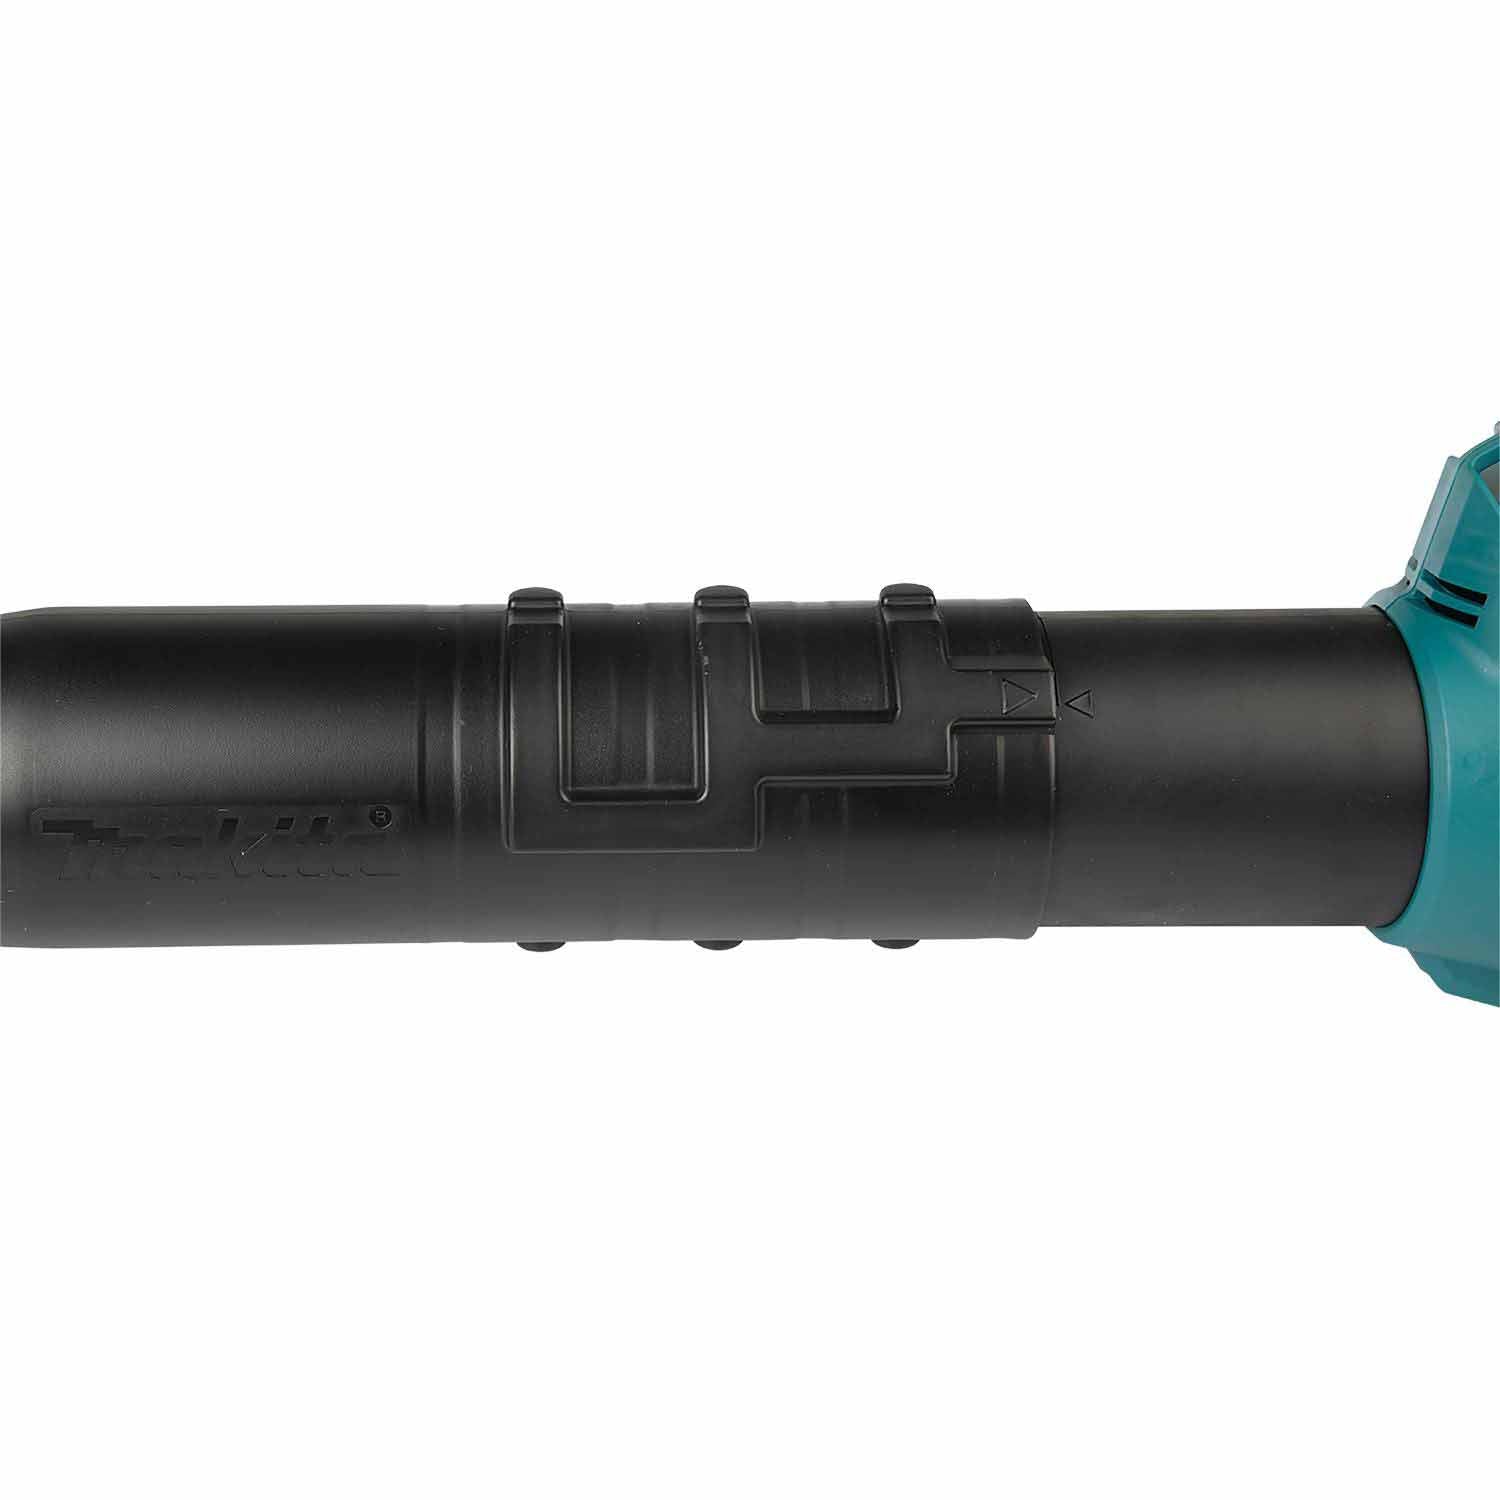 Makita CBU01Z 36V Brushless Blower, Connector Cable, Tool Only